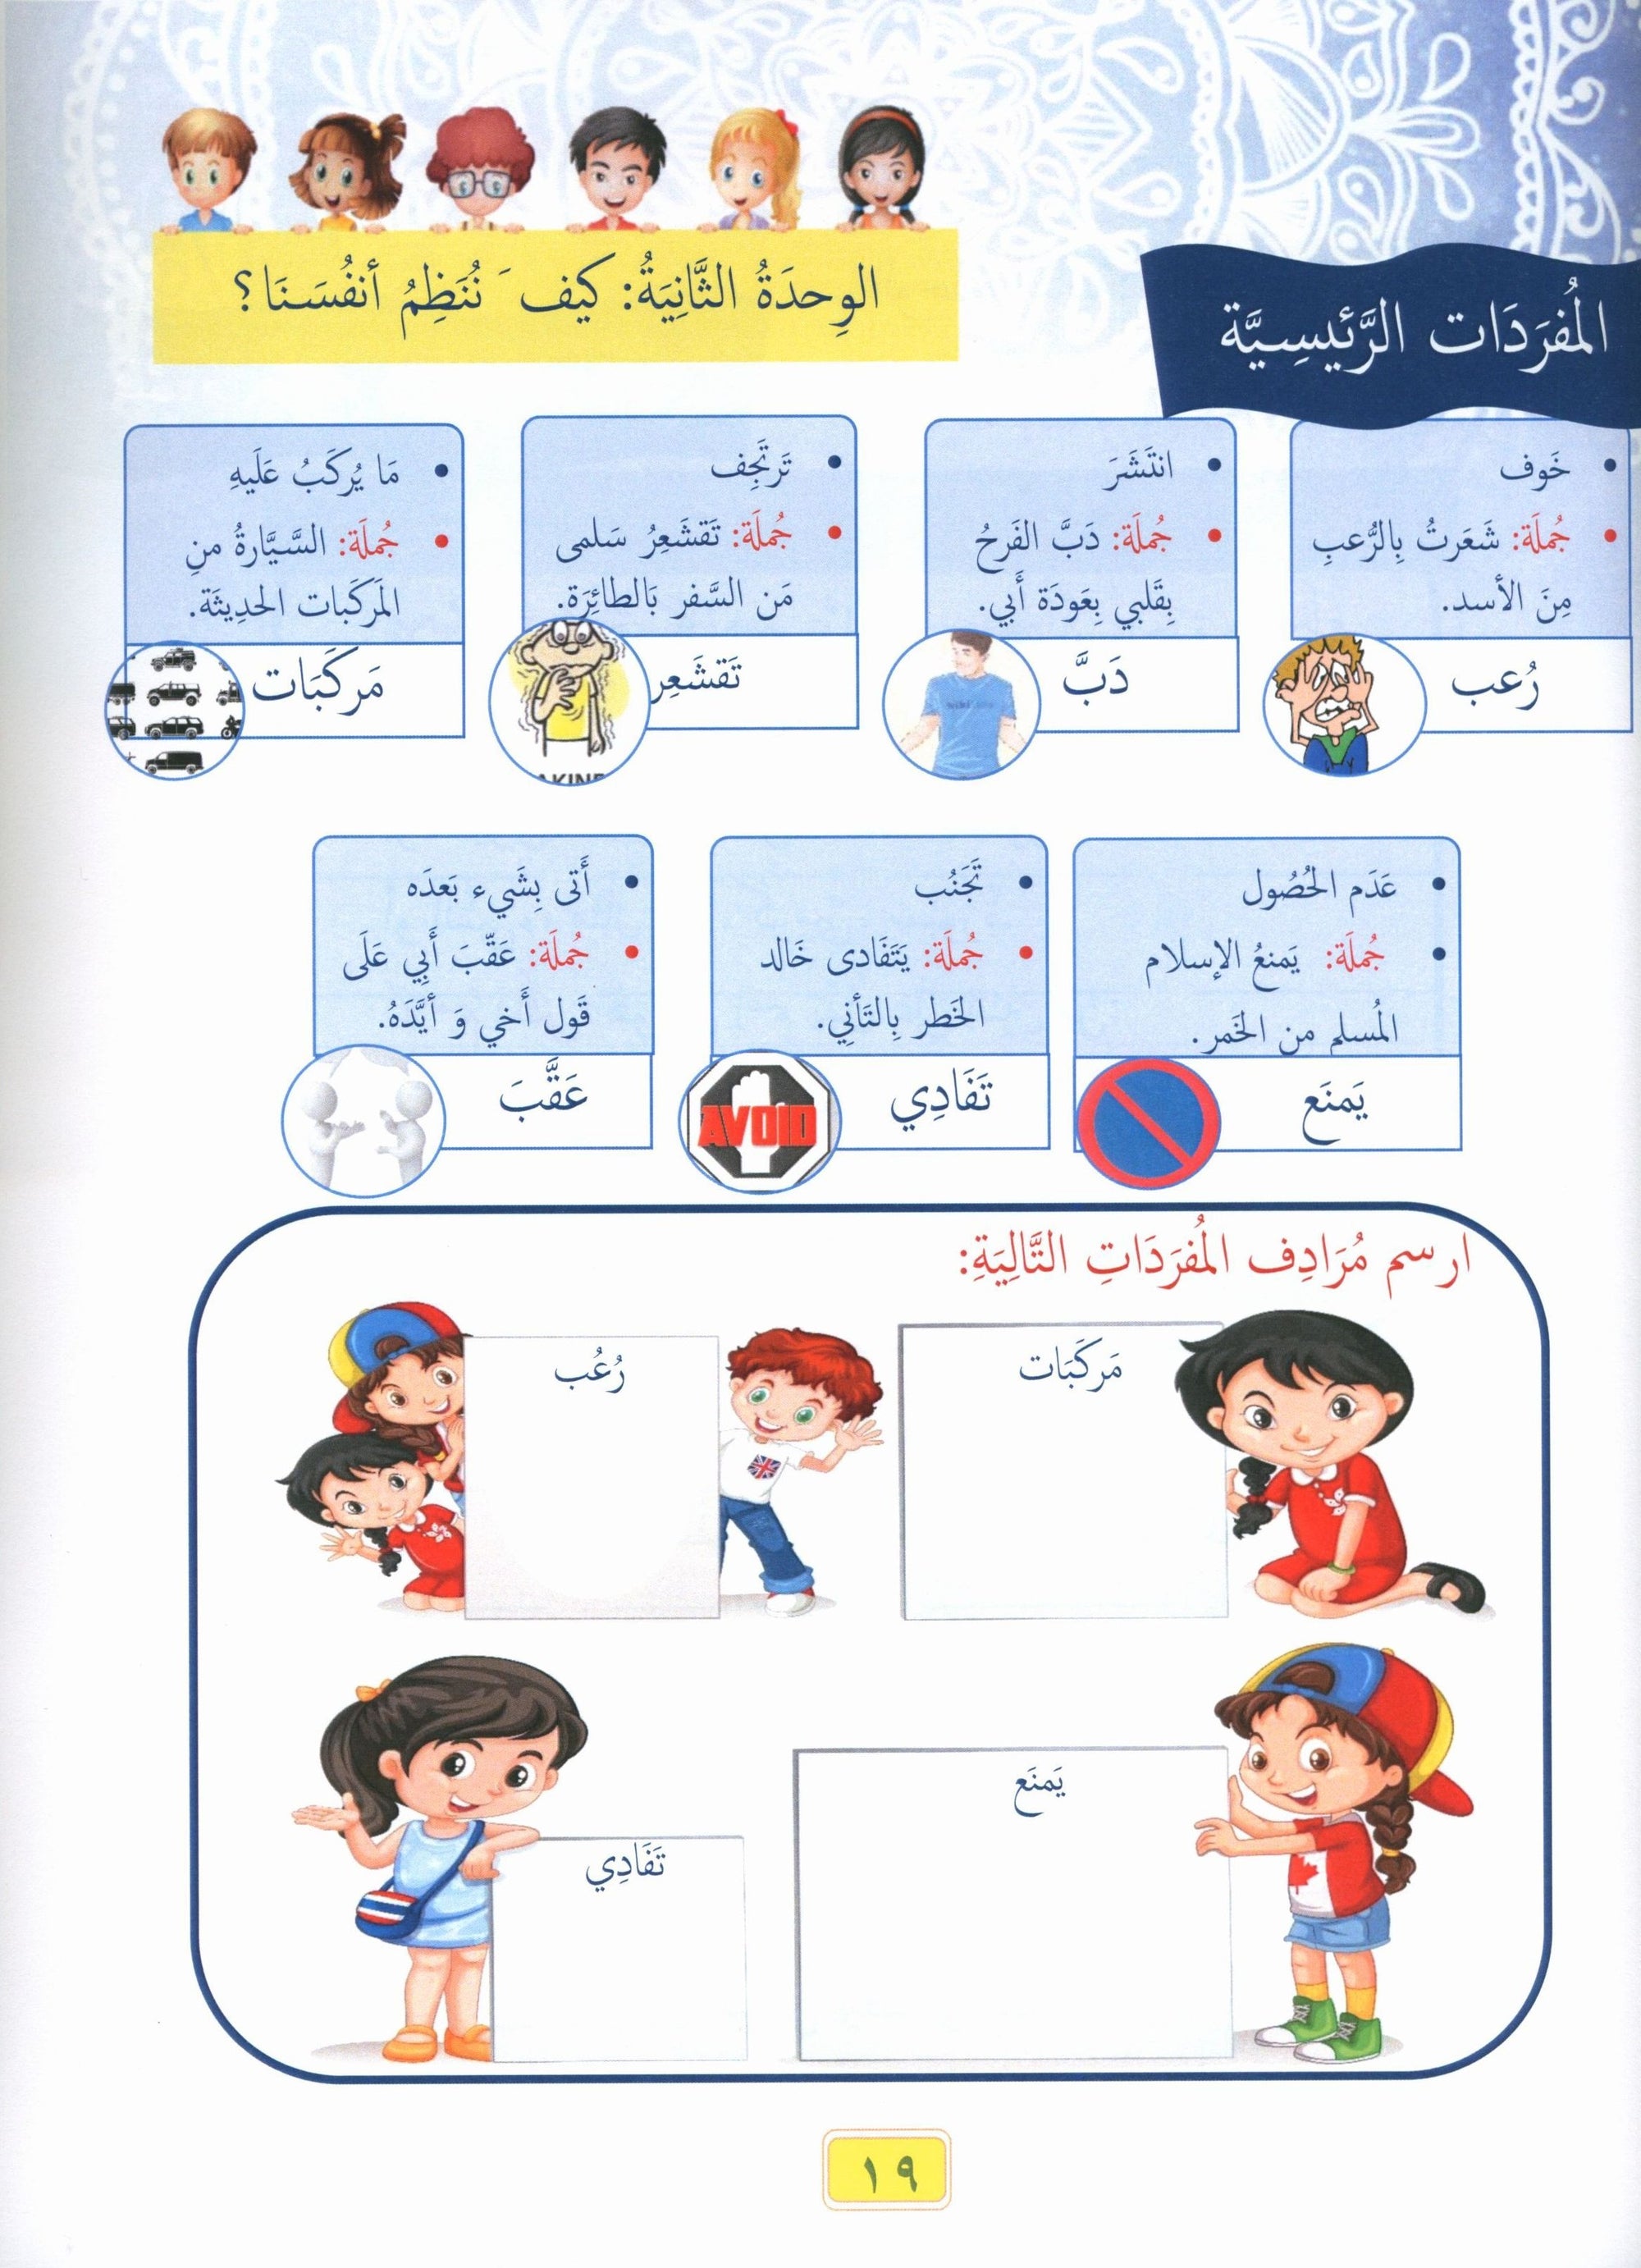 Our Language Is Our Pride Reading Level 4 لغتنا فخرنا